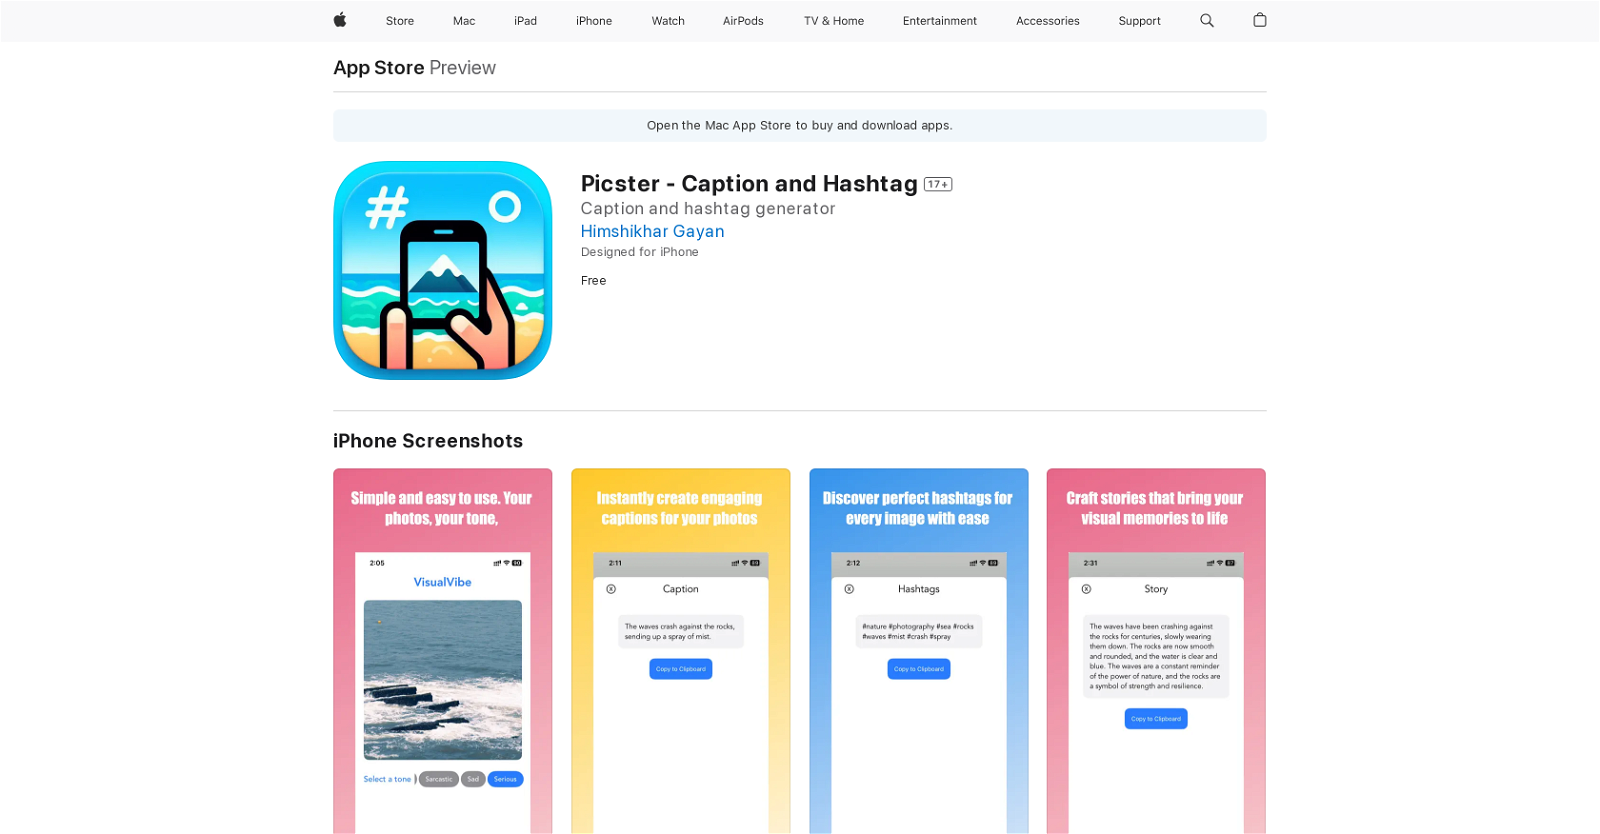 Picster - Caption and Hashtag website